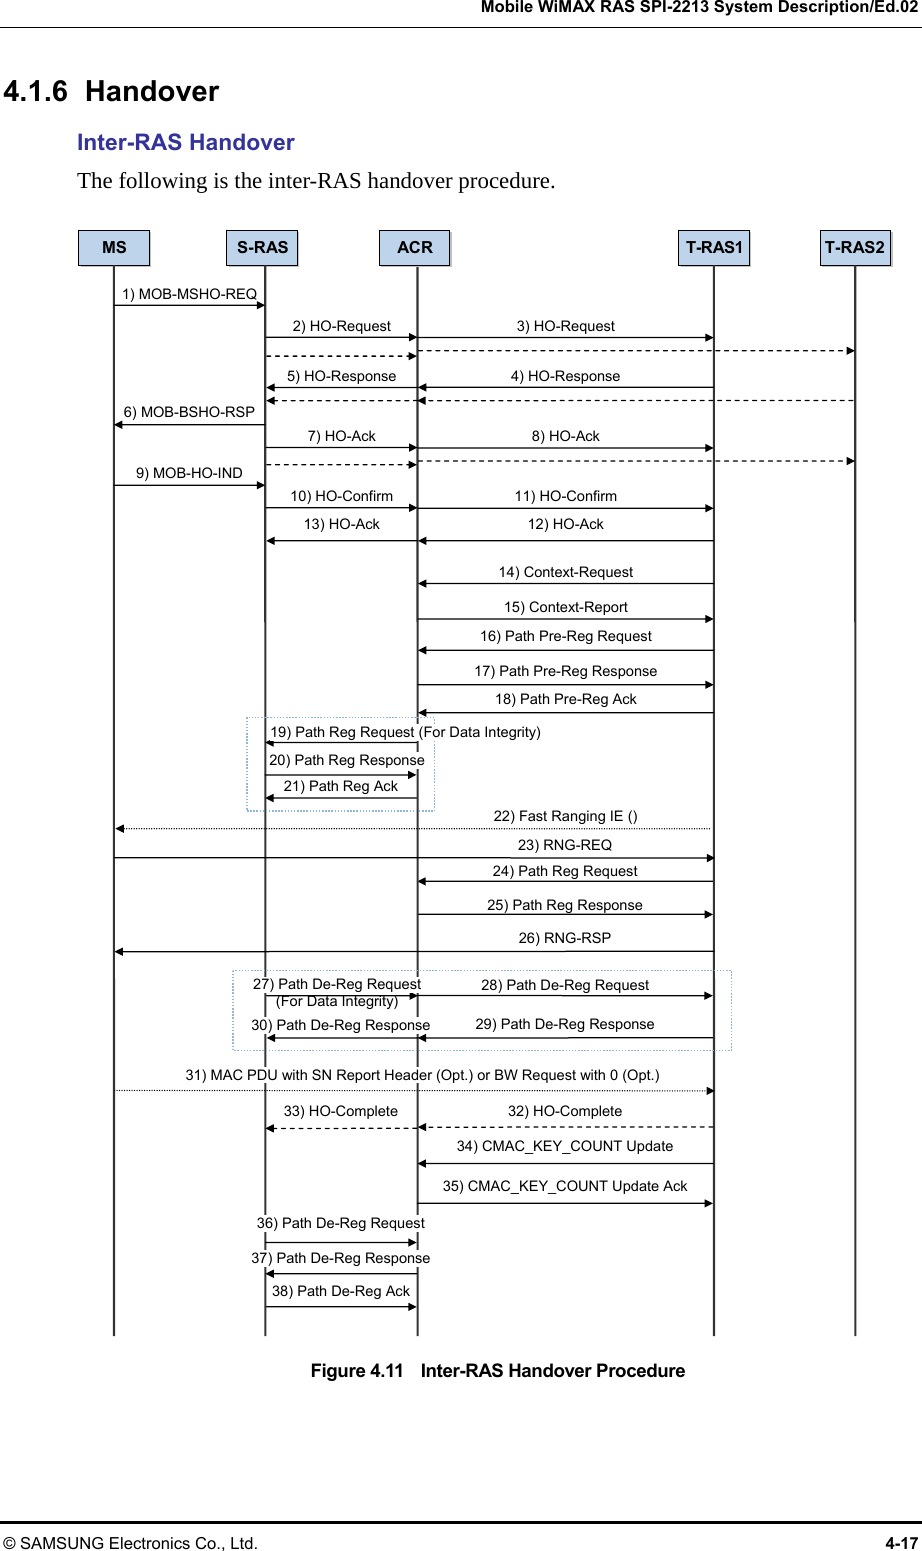   Mobile WiMAX RAS SPI-2213 System Description/Ed.02 © SAMSUNG Electronics Co., Ltd.  4-17 4.1.6 Handover Inter-RAS Handover The following is the inter-RAS handover procedure.    Figure 4.11    Inter-RAS Handover Procedure 25) Path Reg Response 24) Path Reg Request 21) Path Reg Ack MS  S-RAS  T-RAS1  T-RAS21) MOB-MSHO-REQ ACR2) HO-Request  3) HO-Request 4) HO-Response5) HO-Response7) HO-Ack 9) MOB-HO-IND 10) HO-Confirm 14) Context-Request15) Context-Report12) HO-Ack 13) HO-Ack 23) RNG-REQ 26) RNG-RSP 31) MAC PDU with SN Report Header (Opt.) or BW Request with 0 (Opt.) 32) HO-Complete 33) HO-Complete 36) Path De-Reg Request37) Path De-Reg Response6) MOB-BSHO-RSP 8) HO-Ack 11) HO-Confirm 16) Path Pre-Reg Request20) Path Reg Response 17) Path Pre-Reg Response18) Path Pre-Reg Ack 27) Path De-Reg Request   (For Data Integrity)  30) Path De-Reg Response28) Path De-Reg Request29) Path De-Reg Response22) Fast Ranging IE () 34) CMAC_KEY_COUNT Update35) CMAC_KEY_COUNT Update Ack 38) Path De-Reg Ack 19) Path Reg Request (For Data Integrity)